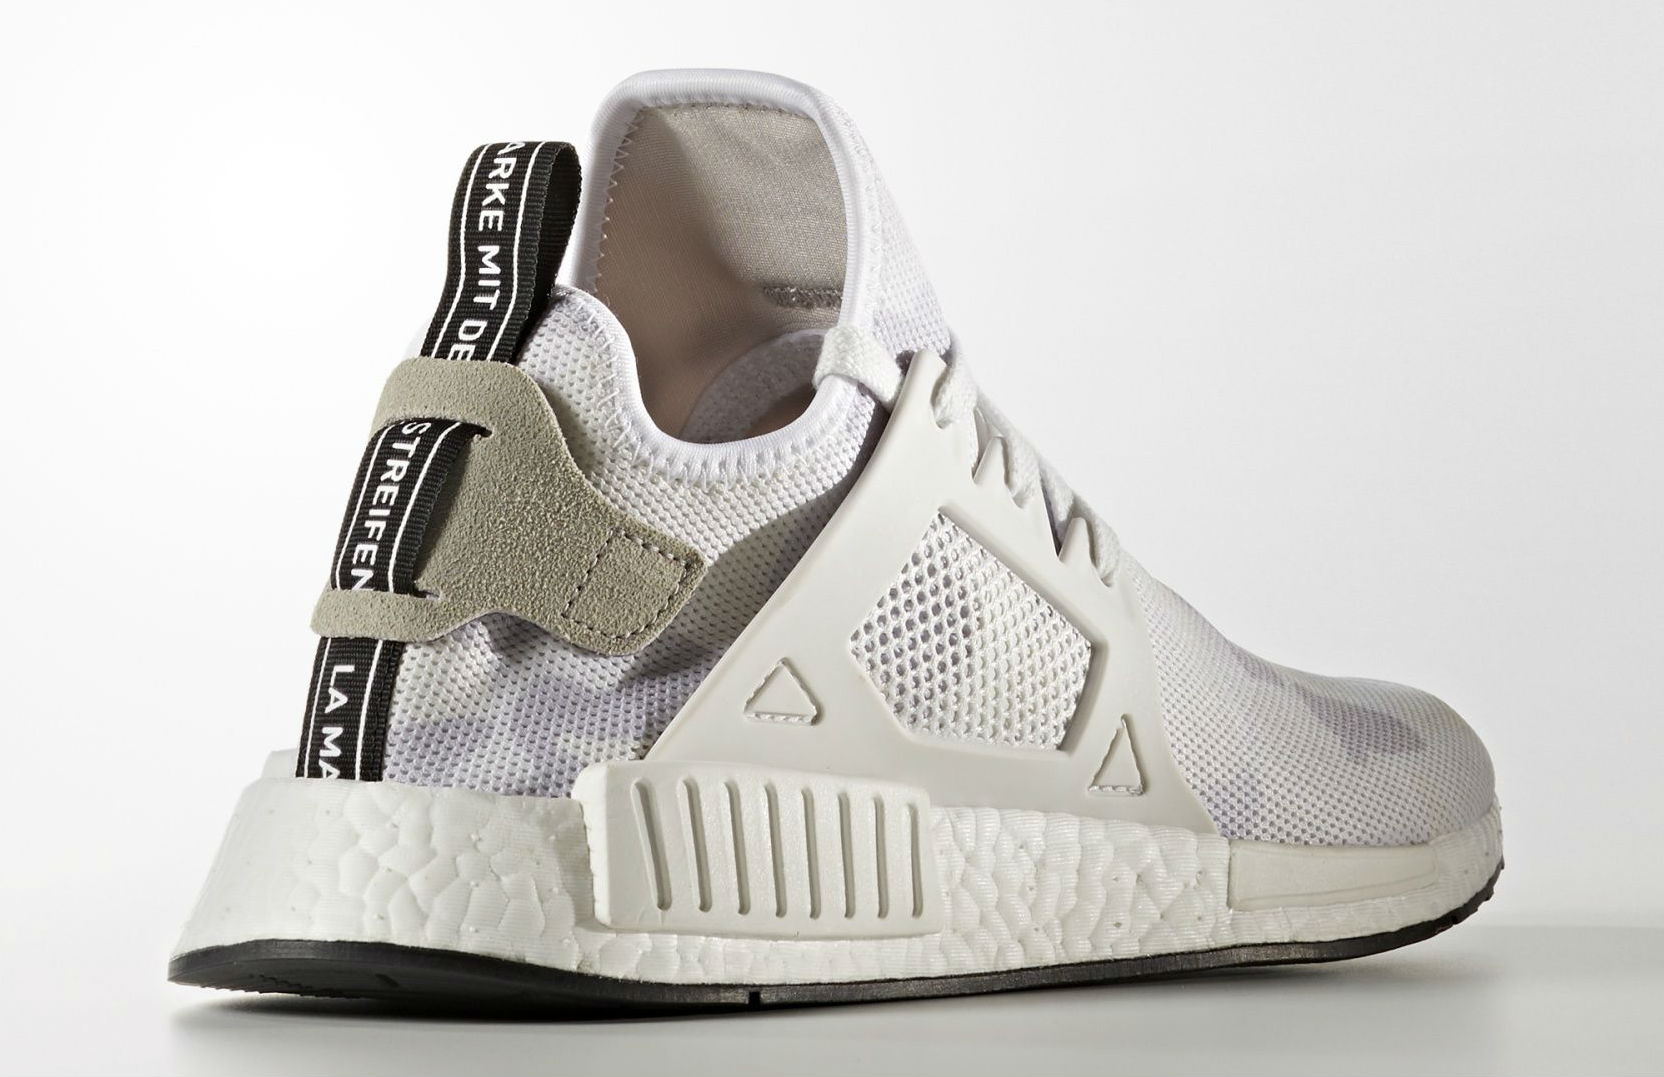 Camouflage the adidas NMD XR1 Fall